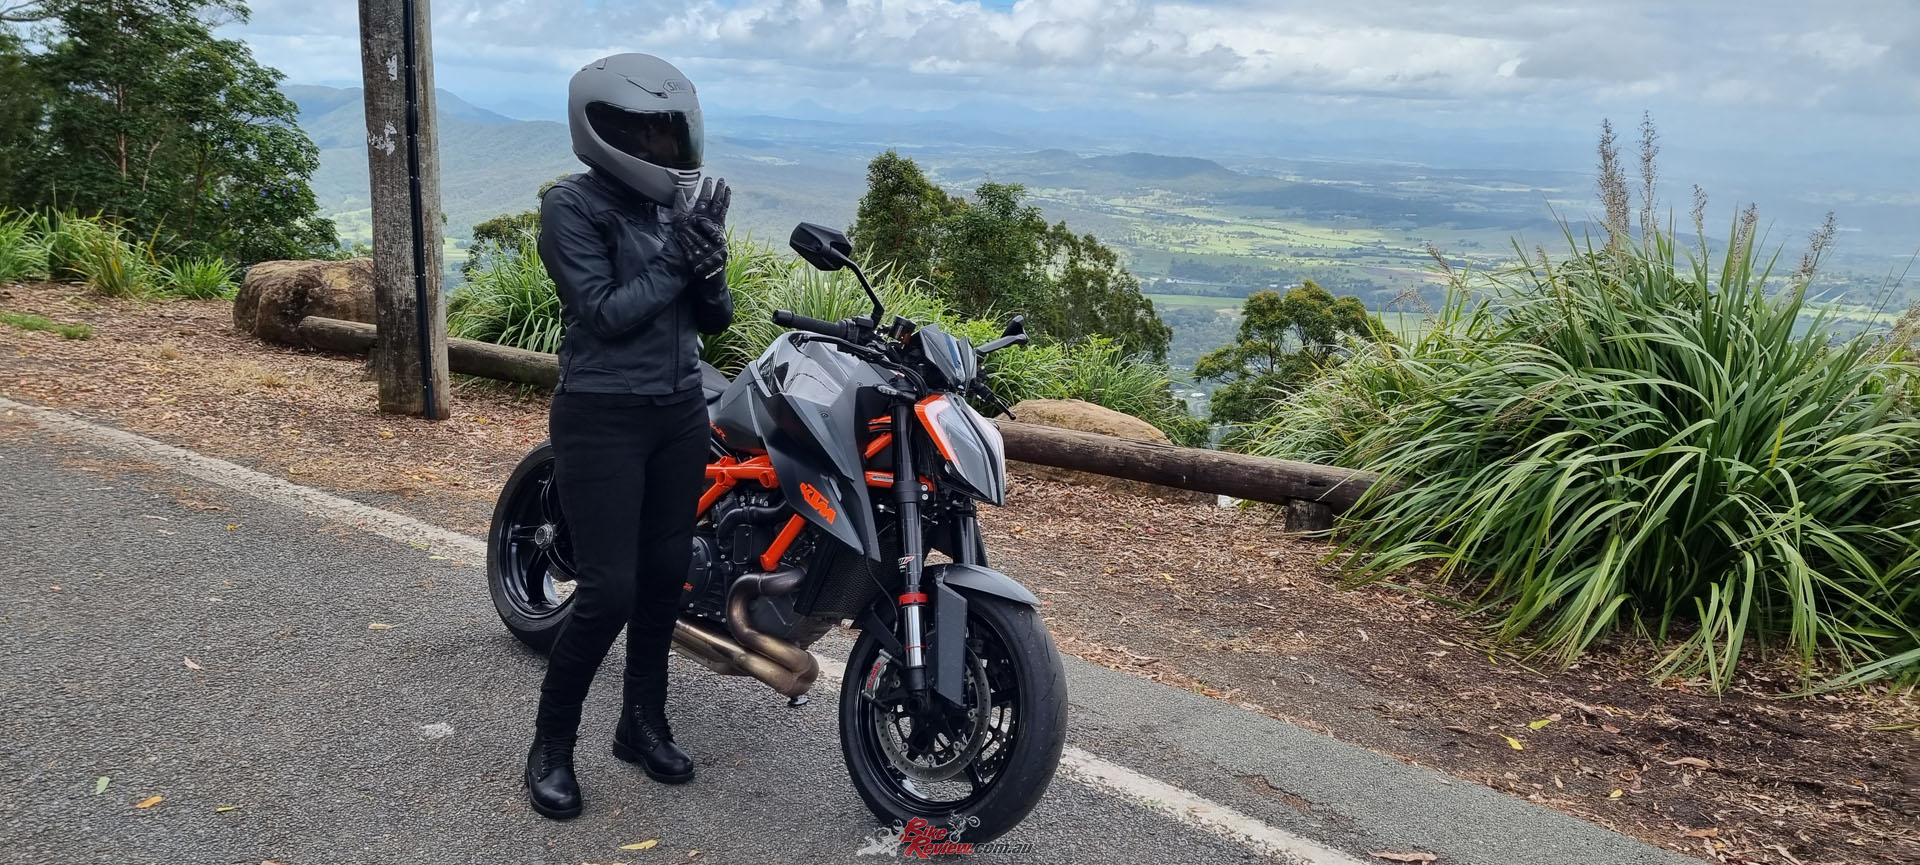 After Simon got some new gear to keep him safe and comfortable on the road, it was time for Justine to look for a new jacket. She landed on the ladies Argon Abyss jacket!